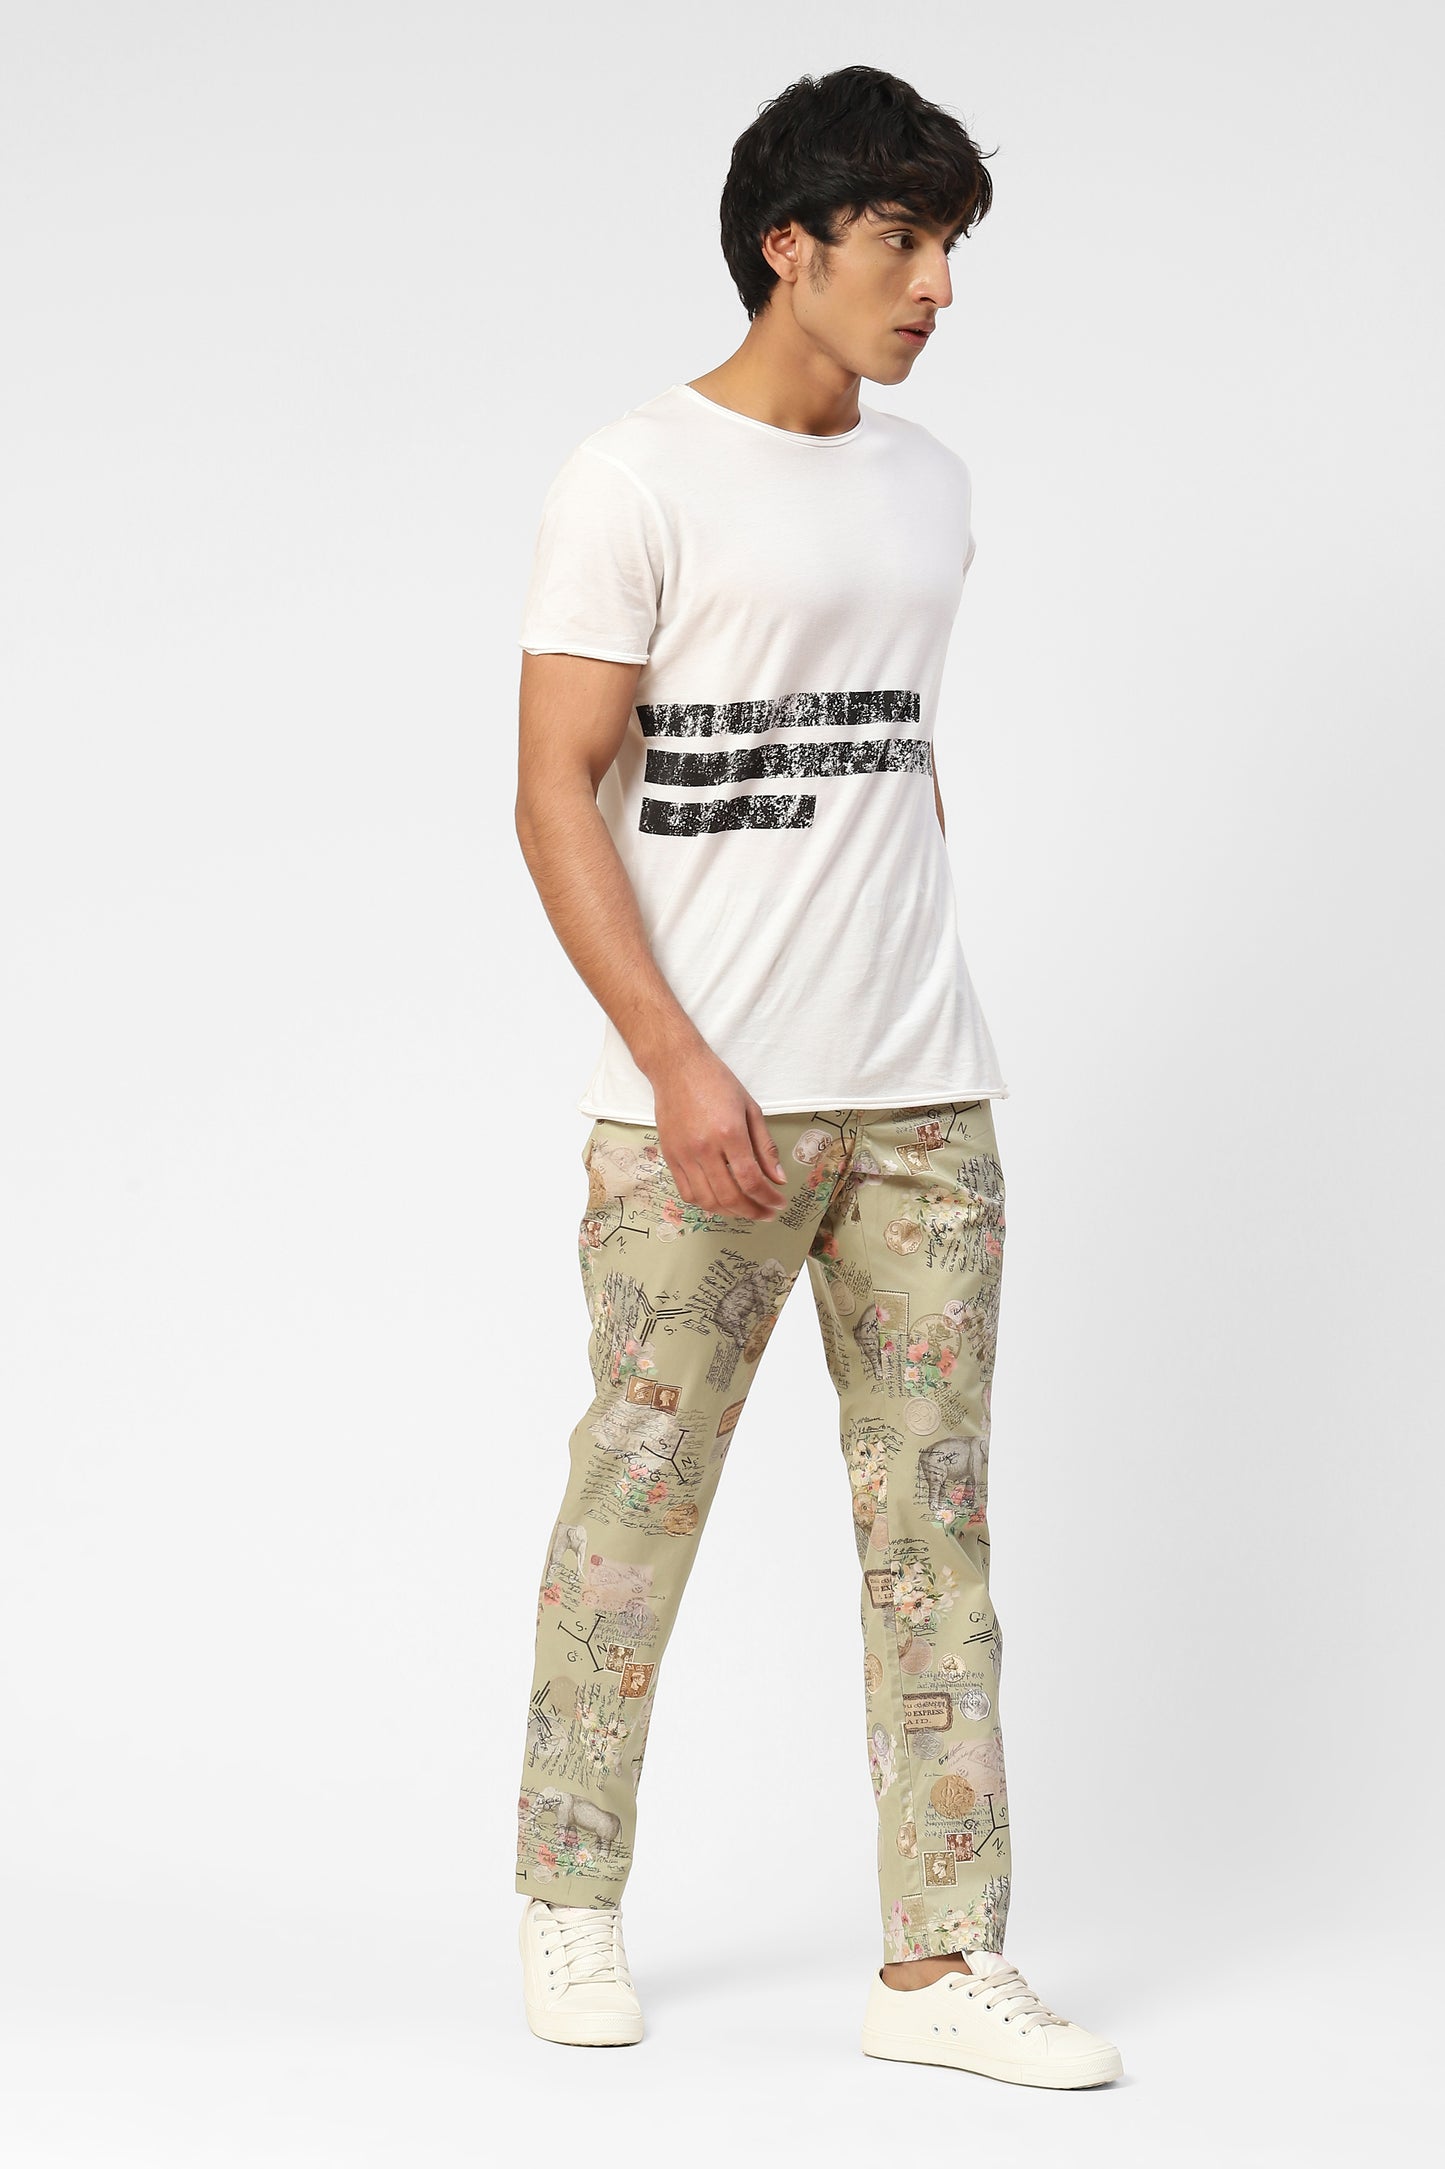 Multiclored Cotton Trousers For Men With Stamp Inspired Print